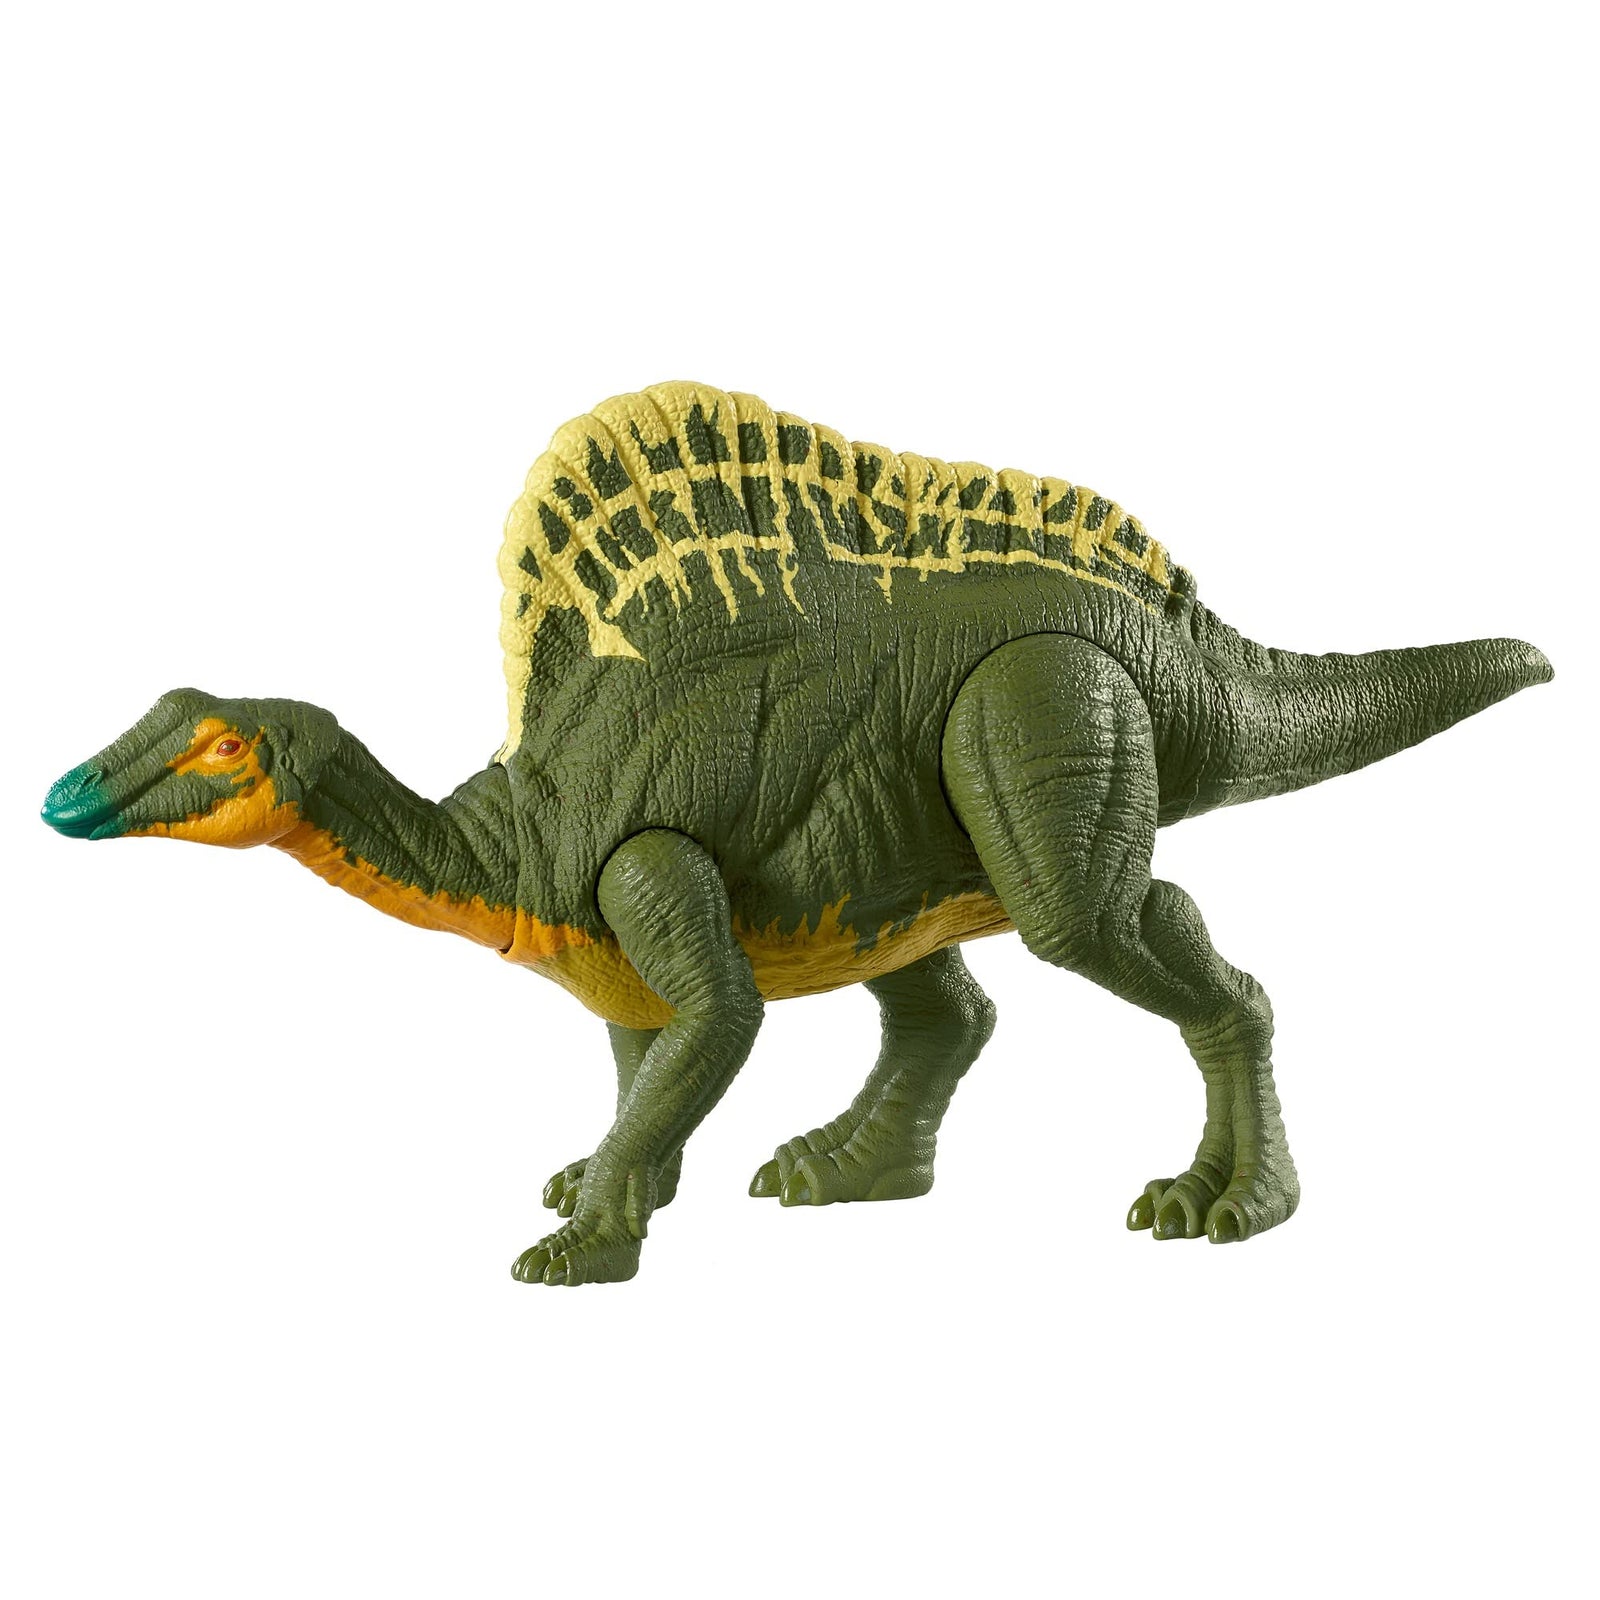 Jurassic World Roar Attack Ouranosaurus Camp Cretaceous Dinosaur Figure with Movable Joints, Realistic Sculpting, Strike Feature & Sounds, Herbivore, Kids Gift 4 Years & Up